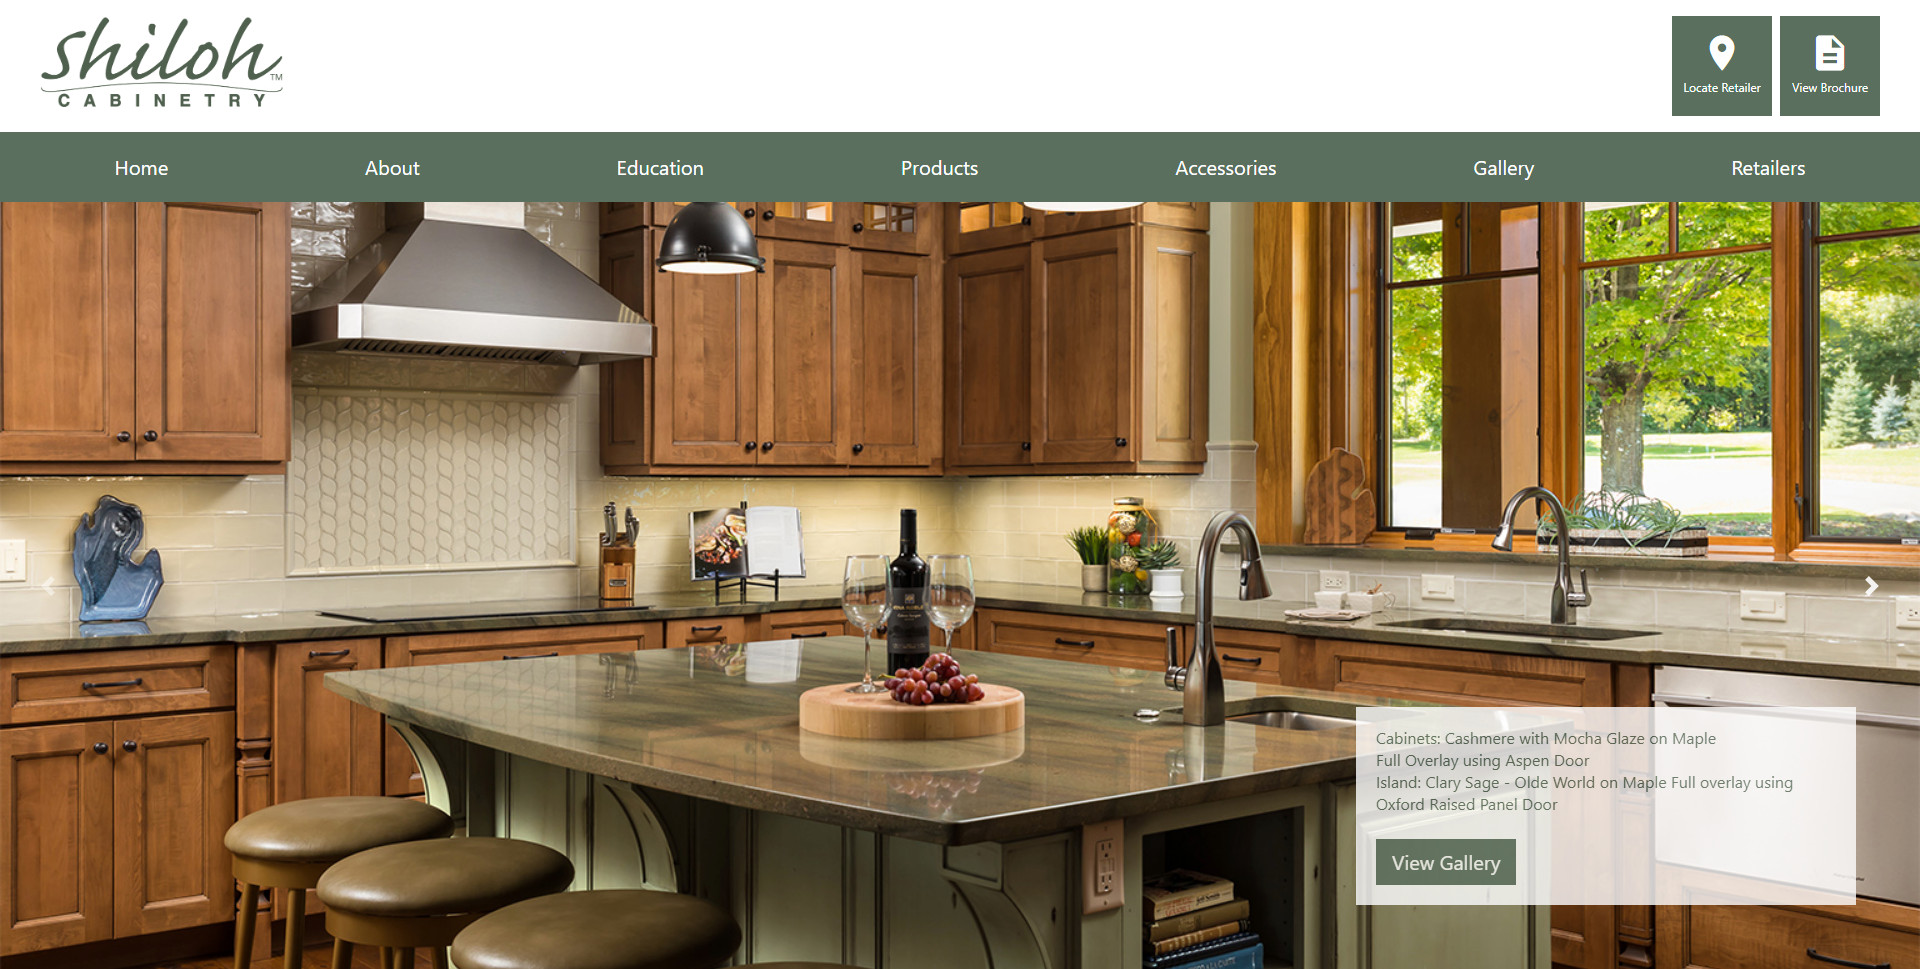 Shiloh Cabinetry website